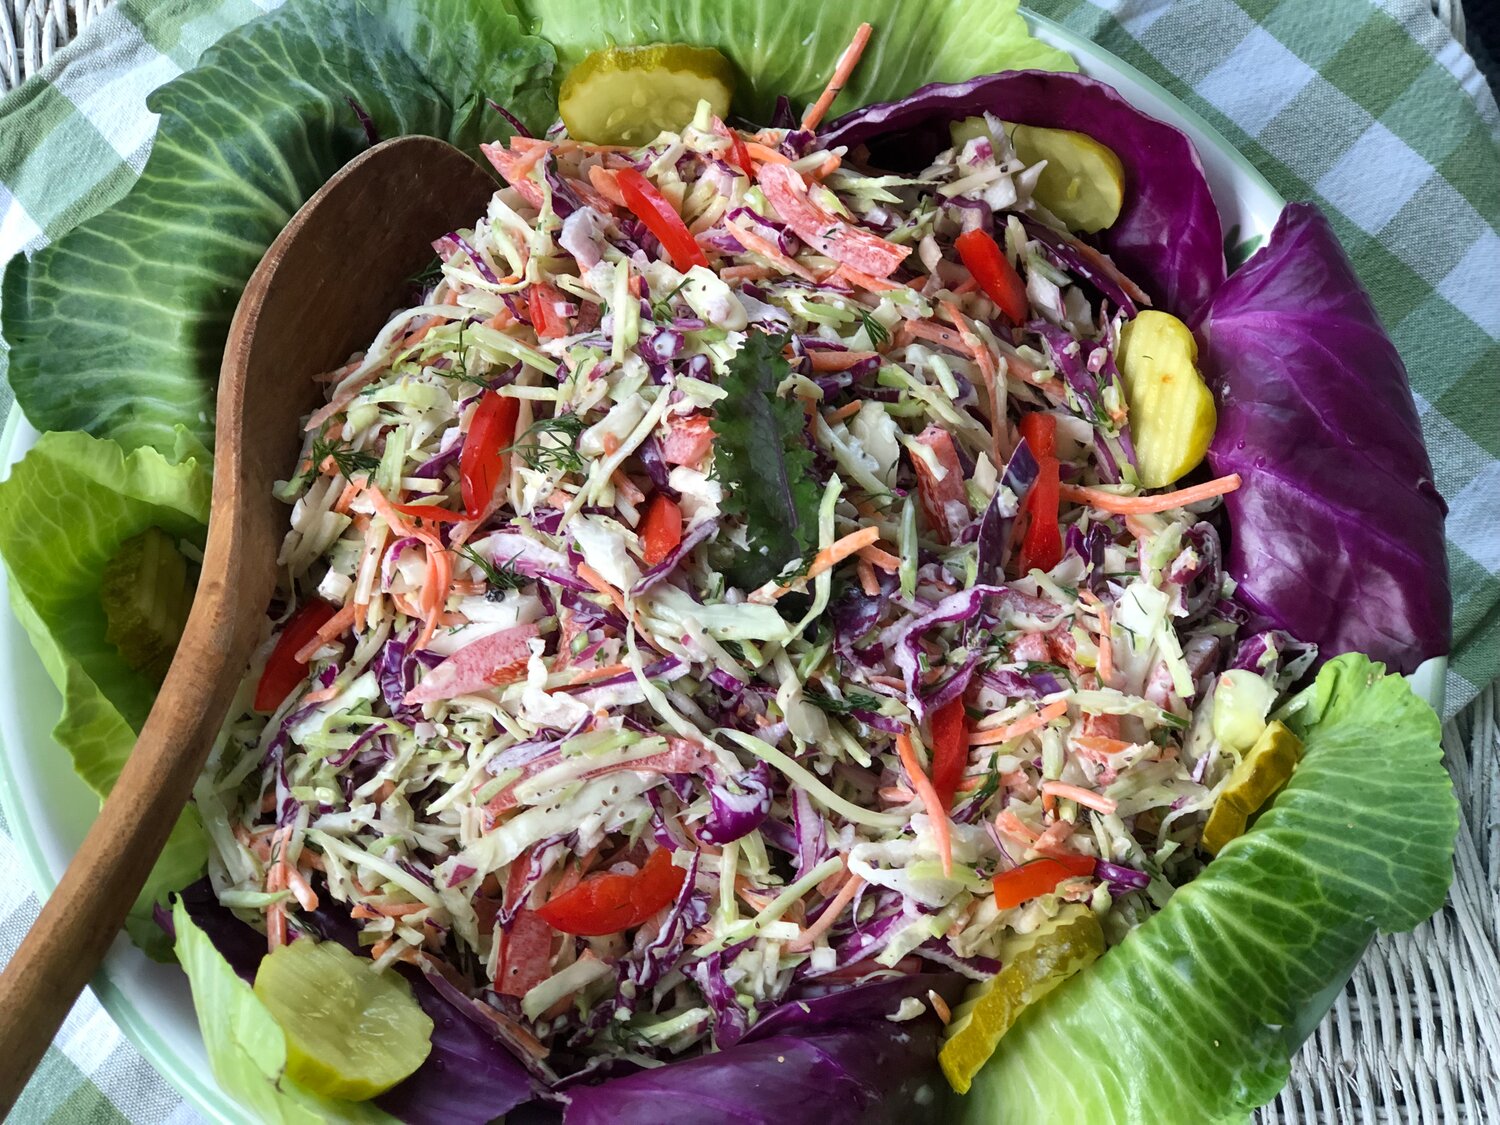 Dolly Parton’s Coleslaw manages to be creamy, sweet, sour and salty all at the same time.